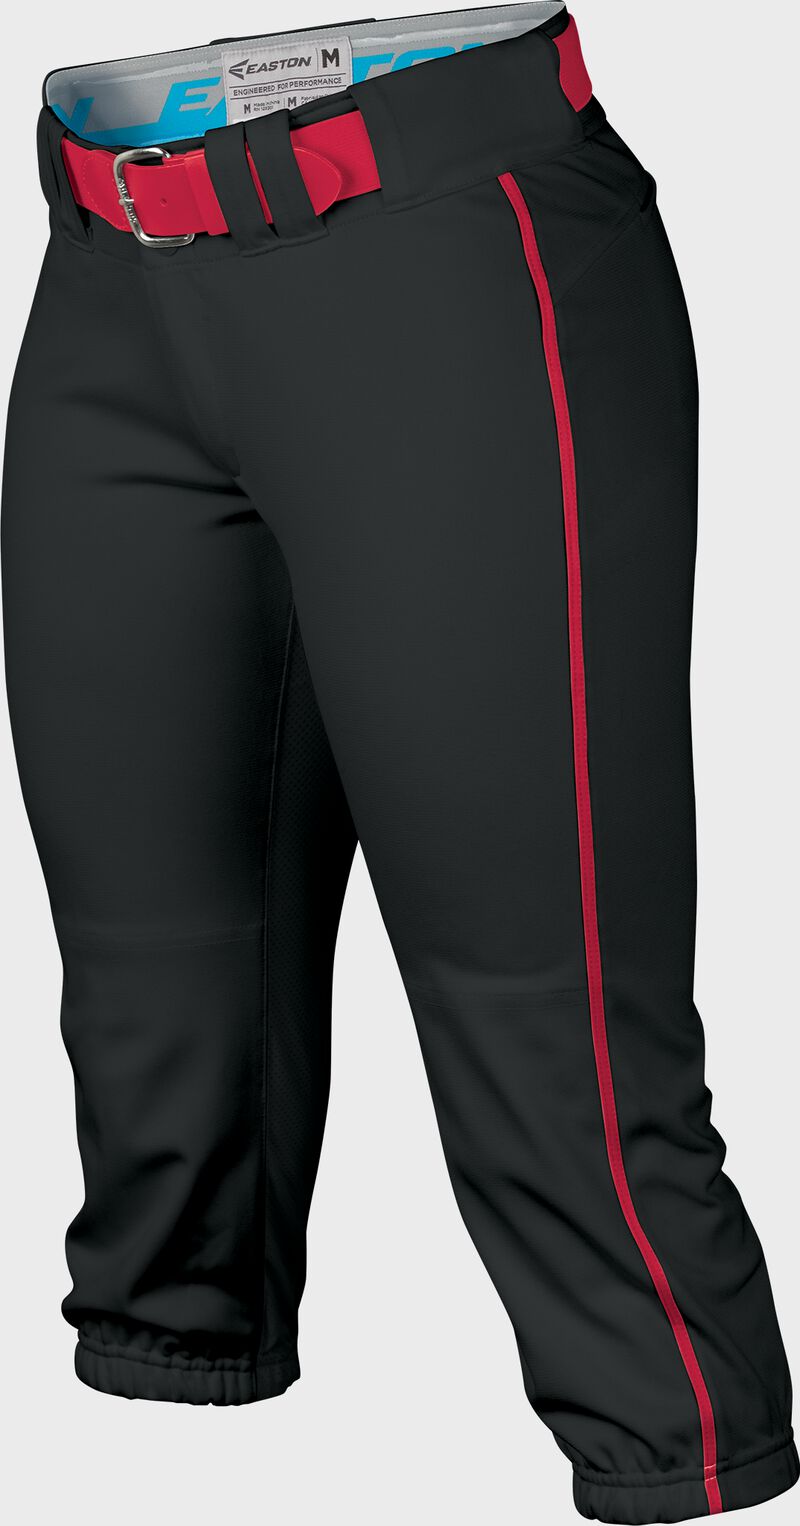 Easton Prowess Softball Pant Women's Piped BLACK/RED  S